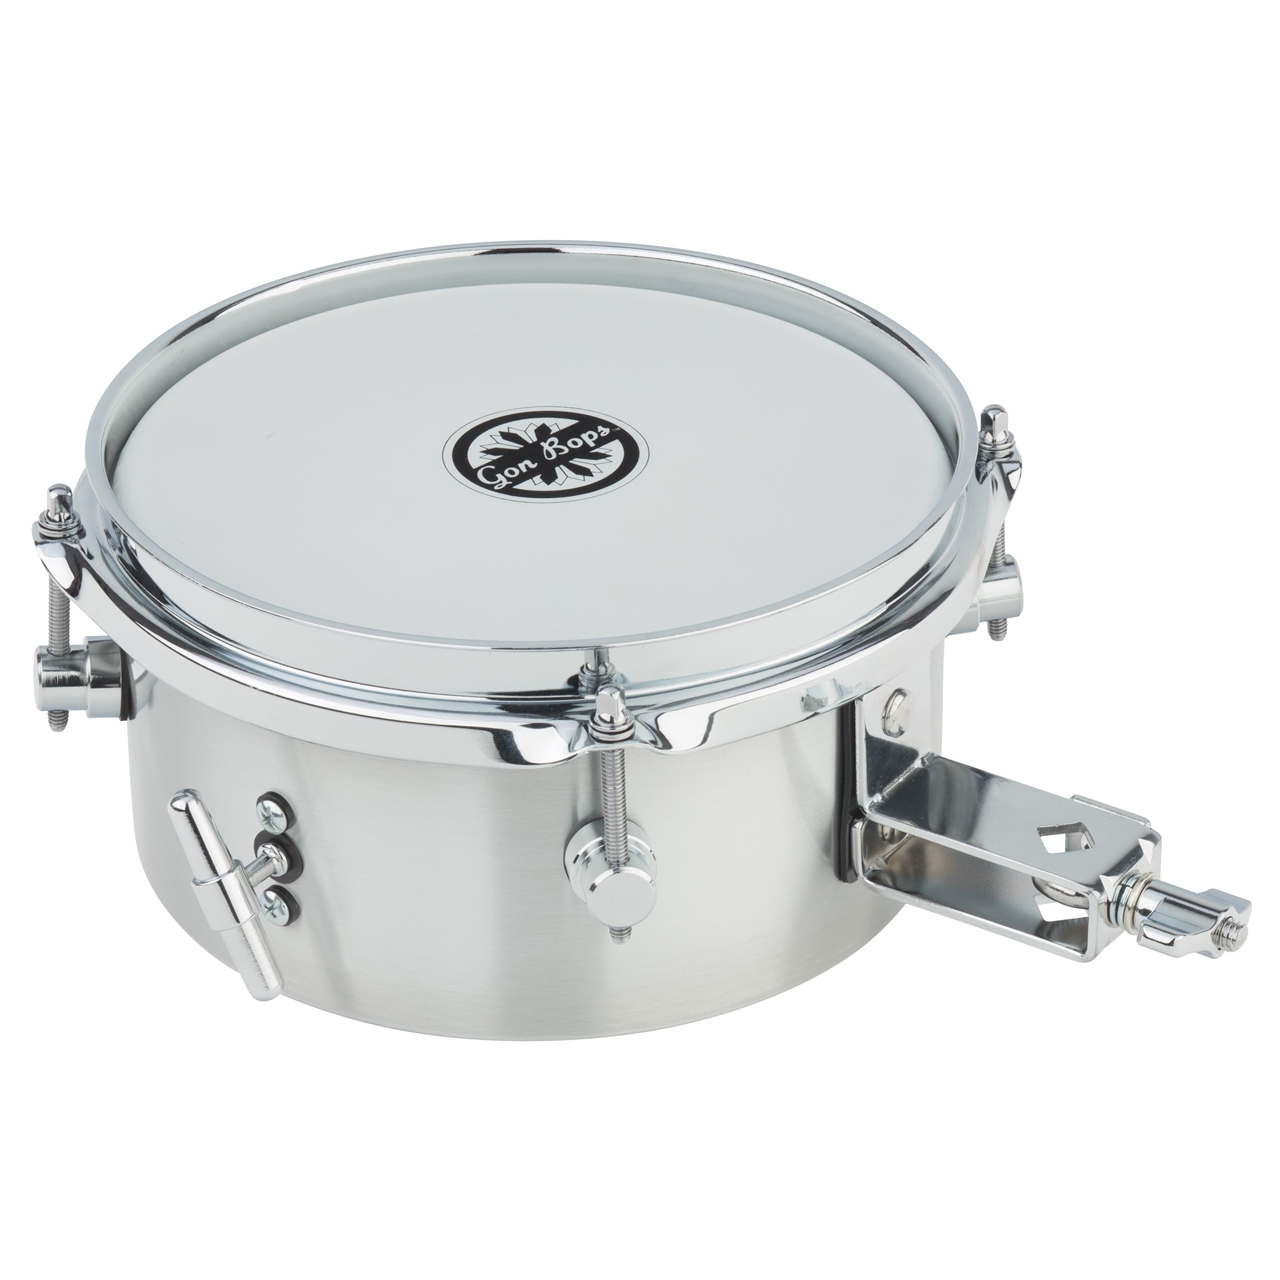 Gon Bops Timbale Snare 8"